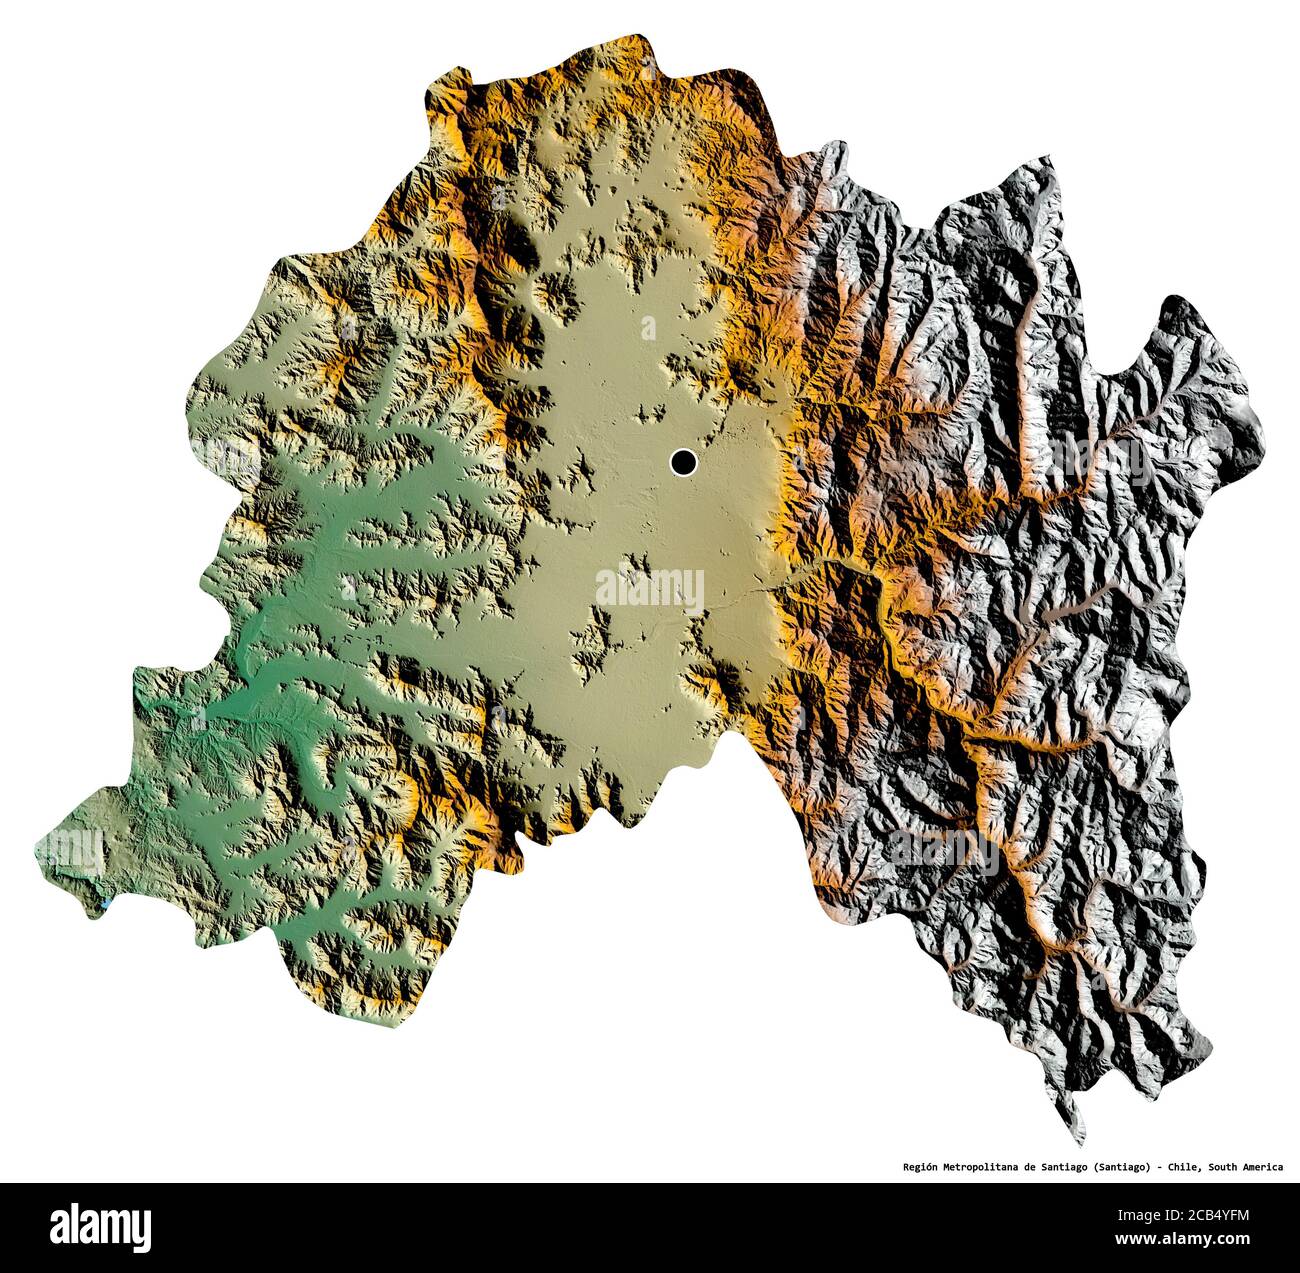 Shape of Región Metropolitana de Santiago, region of Chile, with its capital isolated on white background. Topographic relief map. 3D rendering Stock Photo